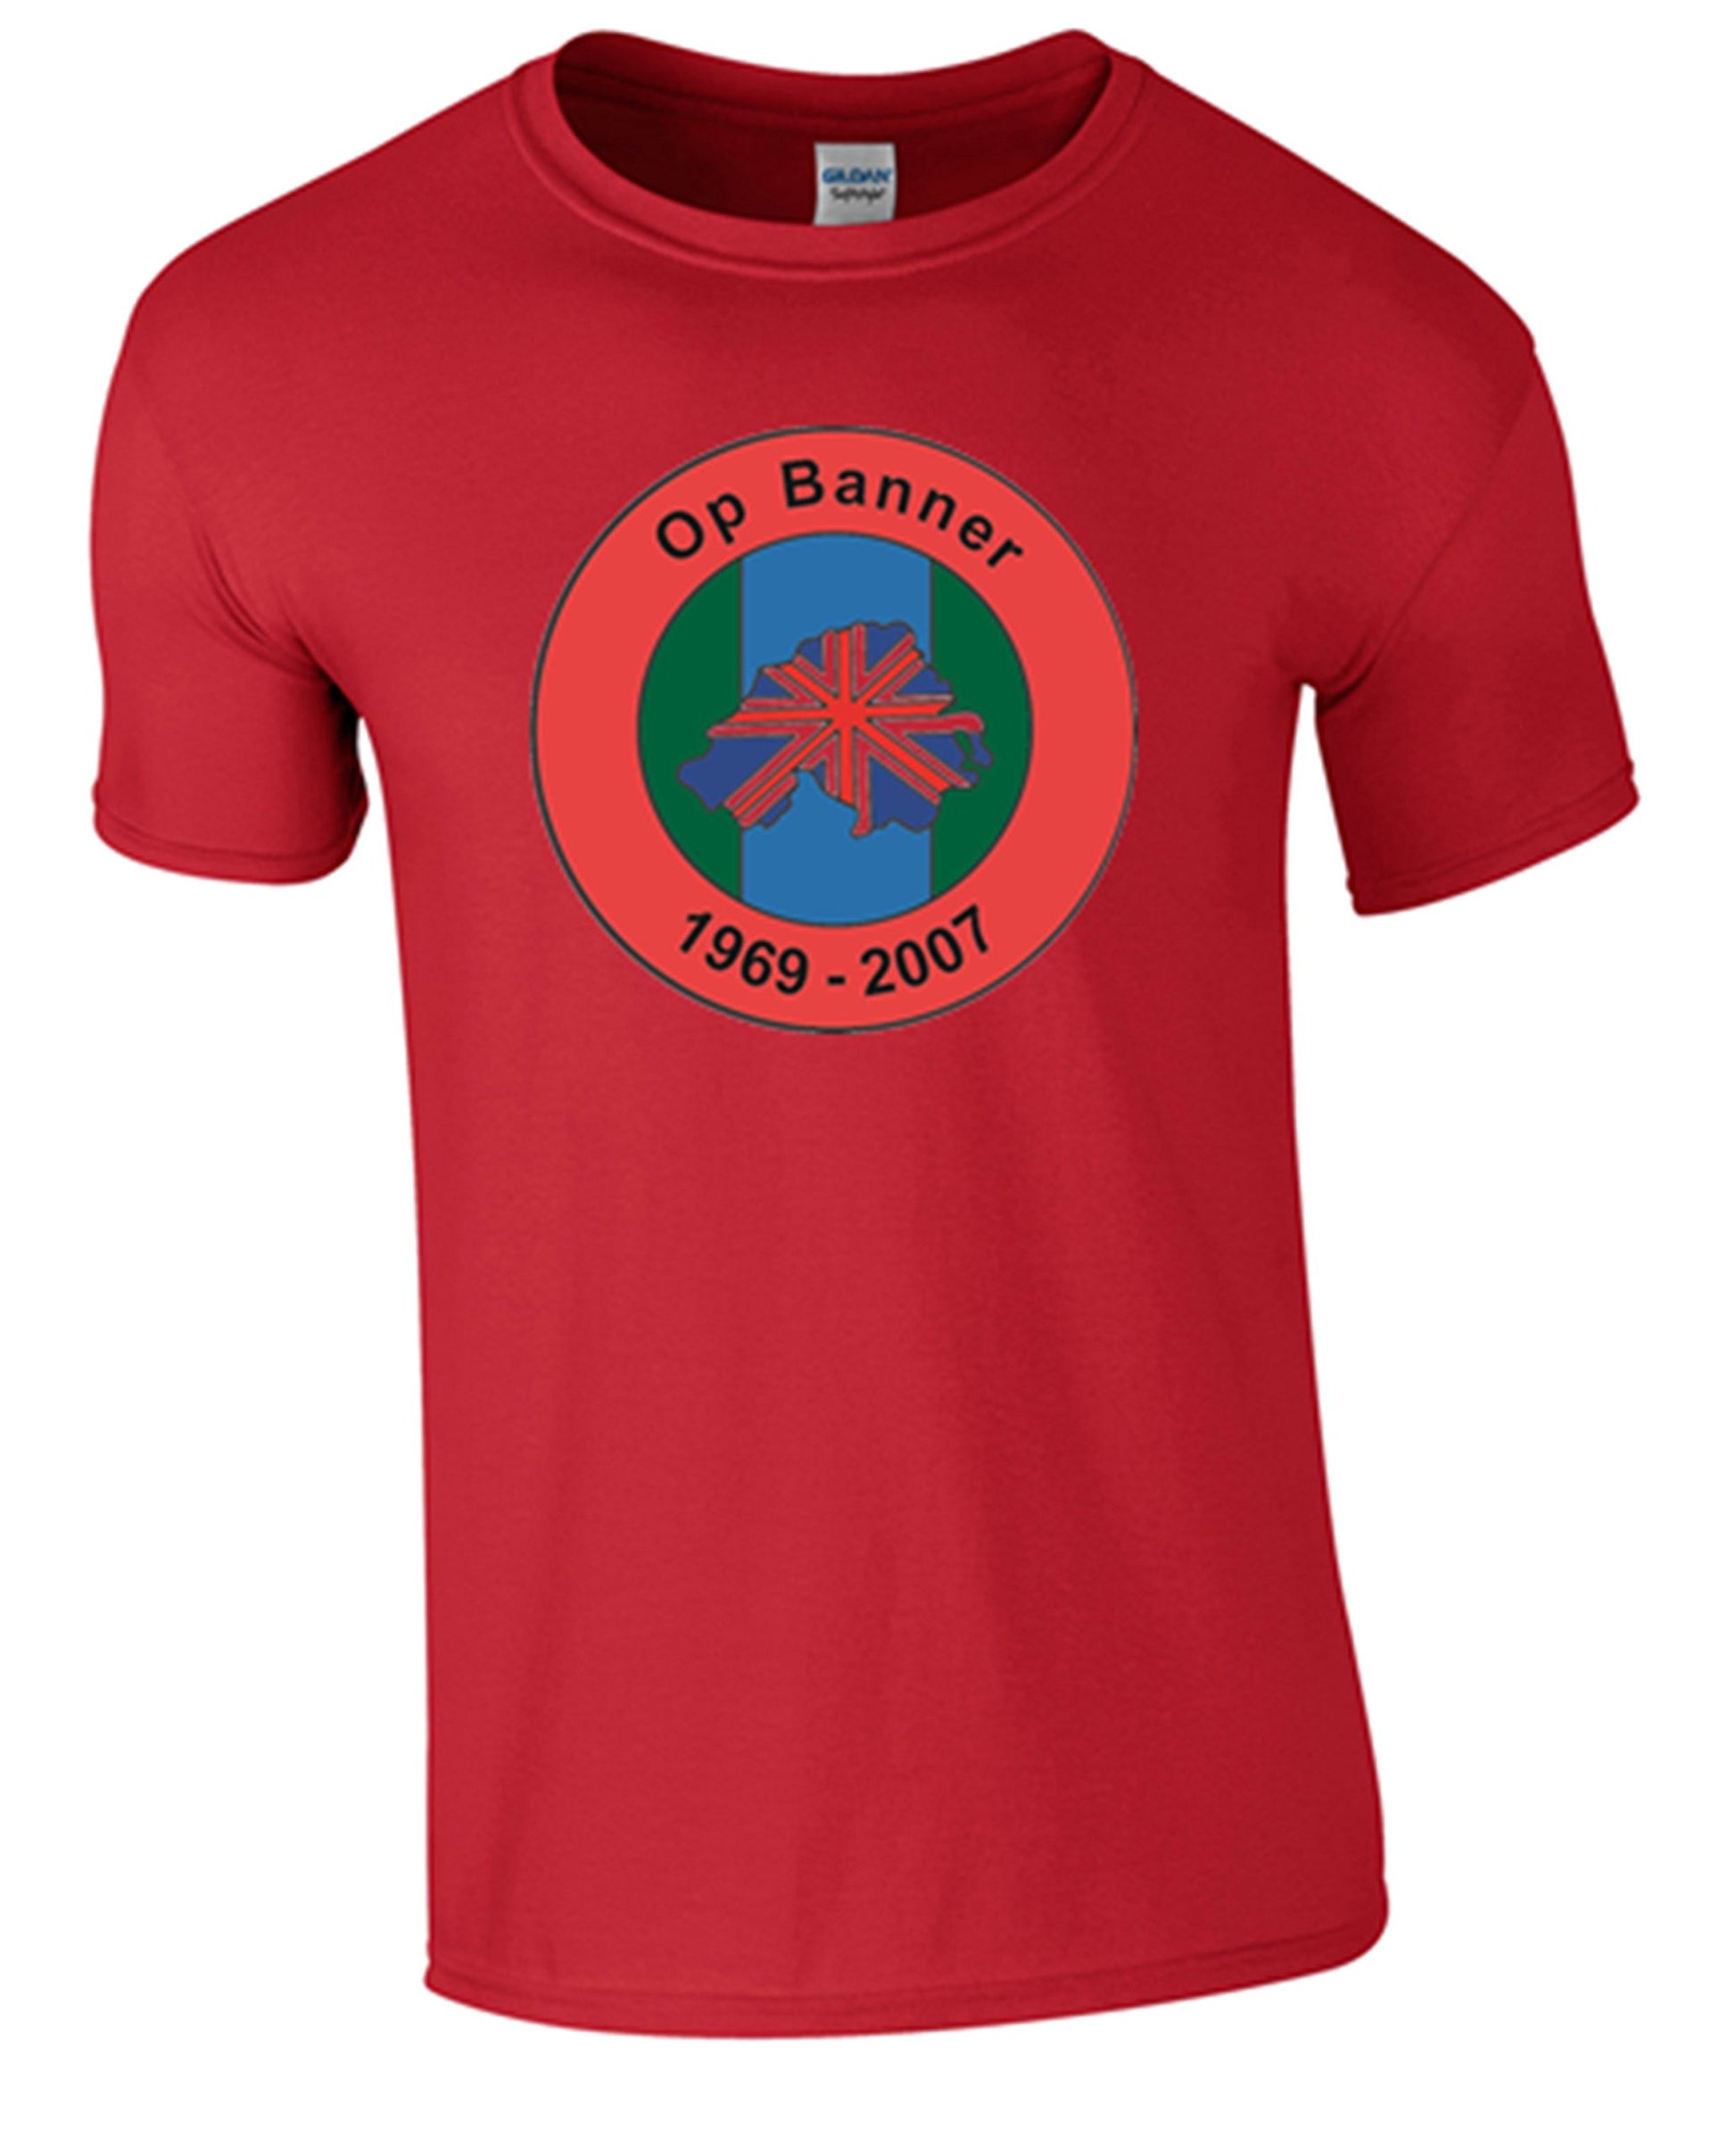 Northern Ireland Ops Banner T-Shirt (S, Red) - Army 1157 kit Army 1157 Kit